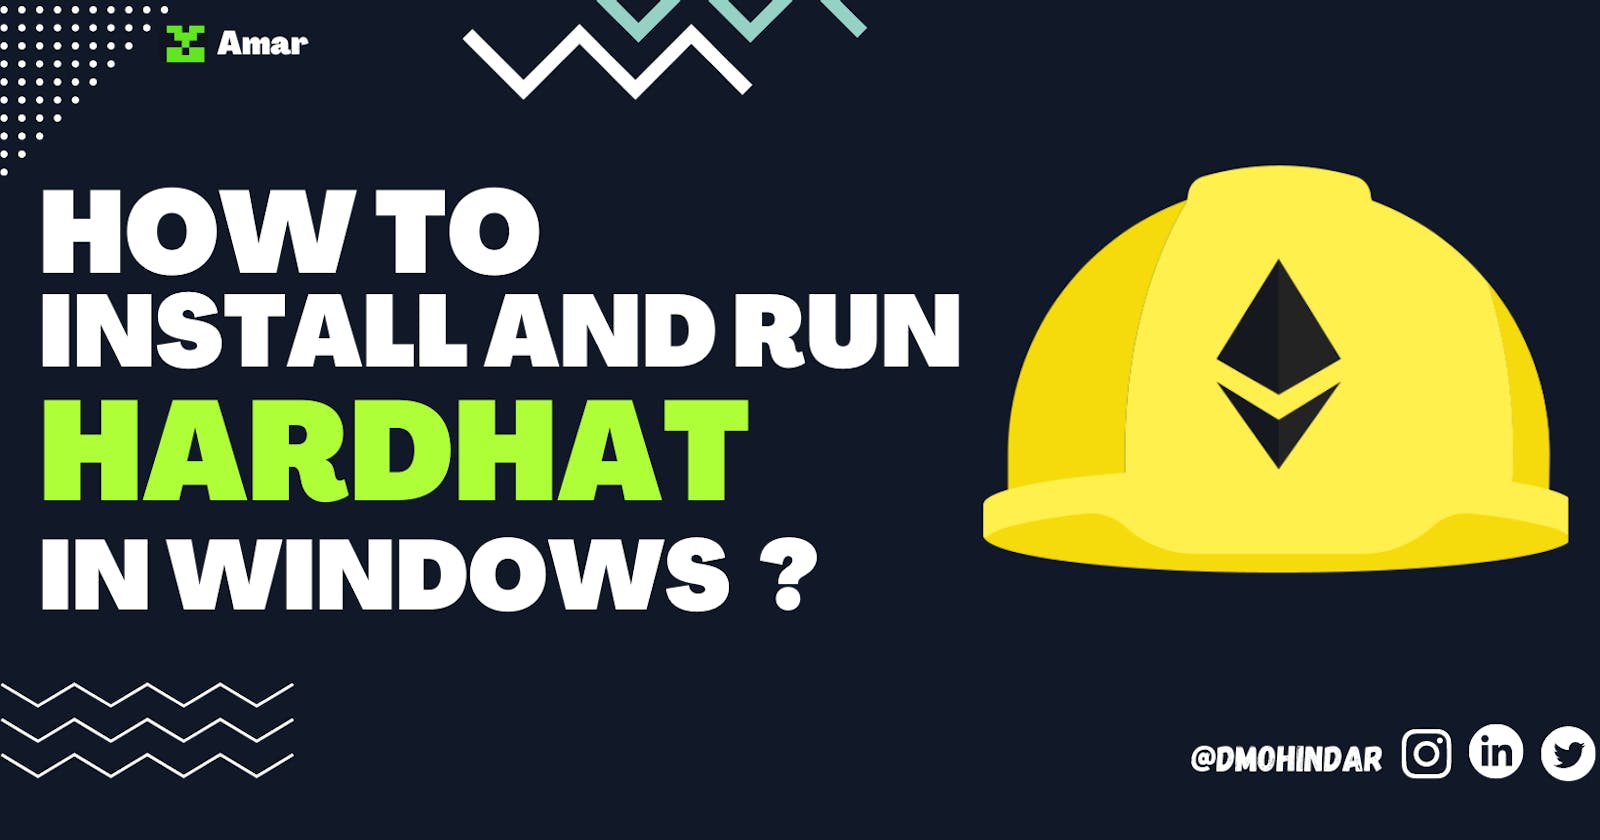 How to Install and Run HARDHAT  in windows?